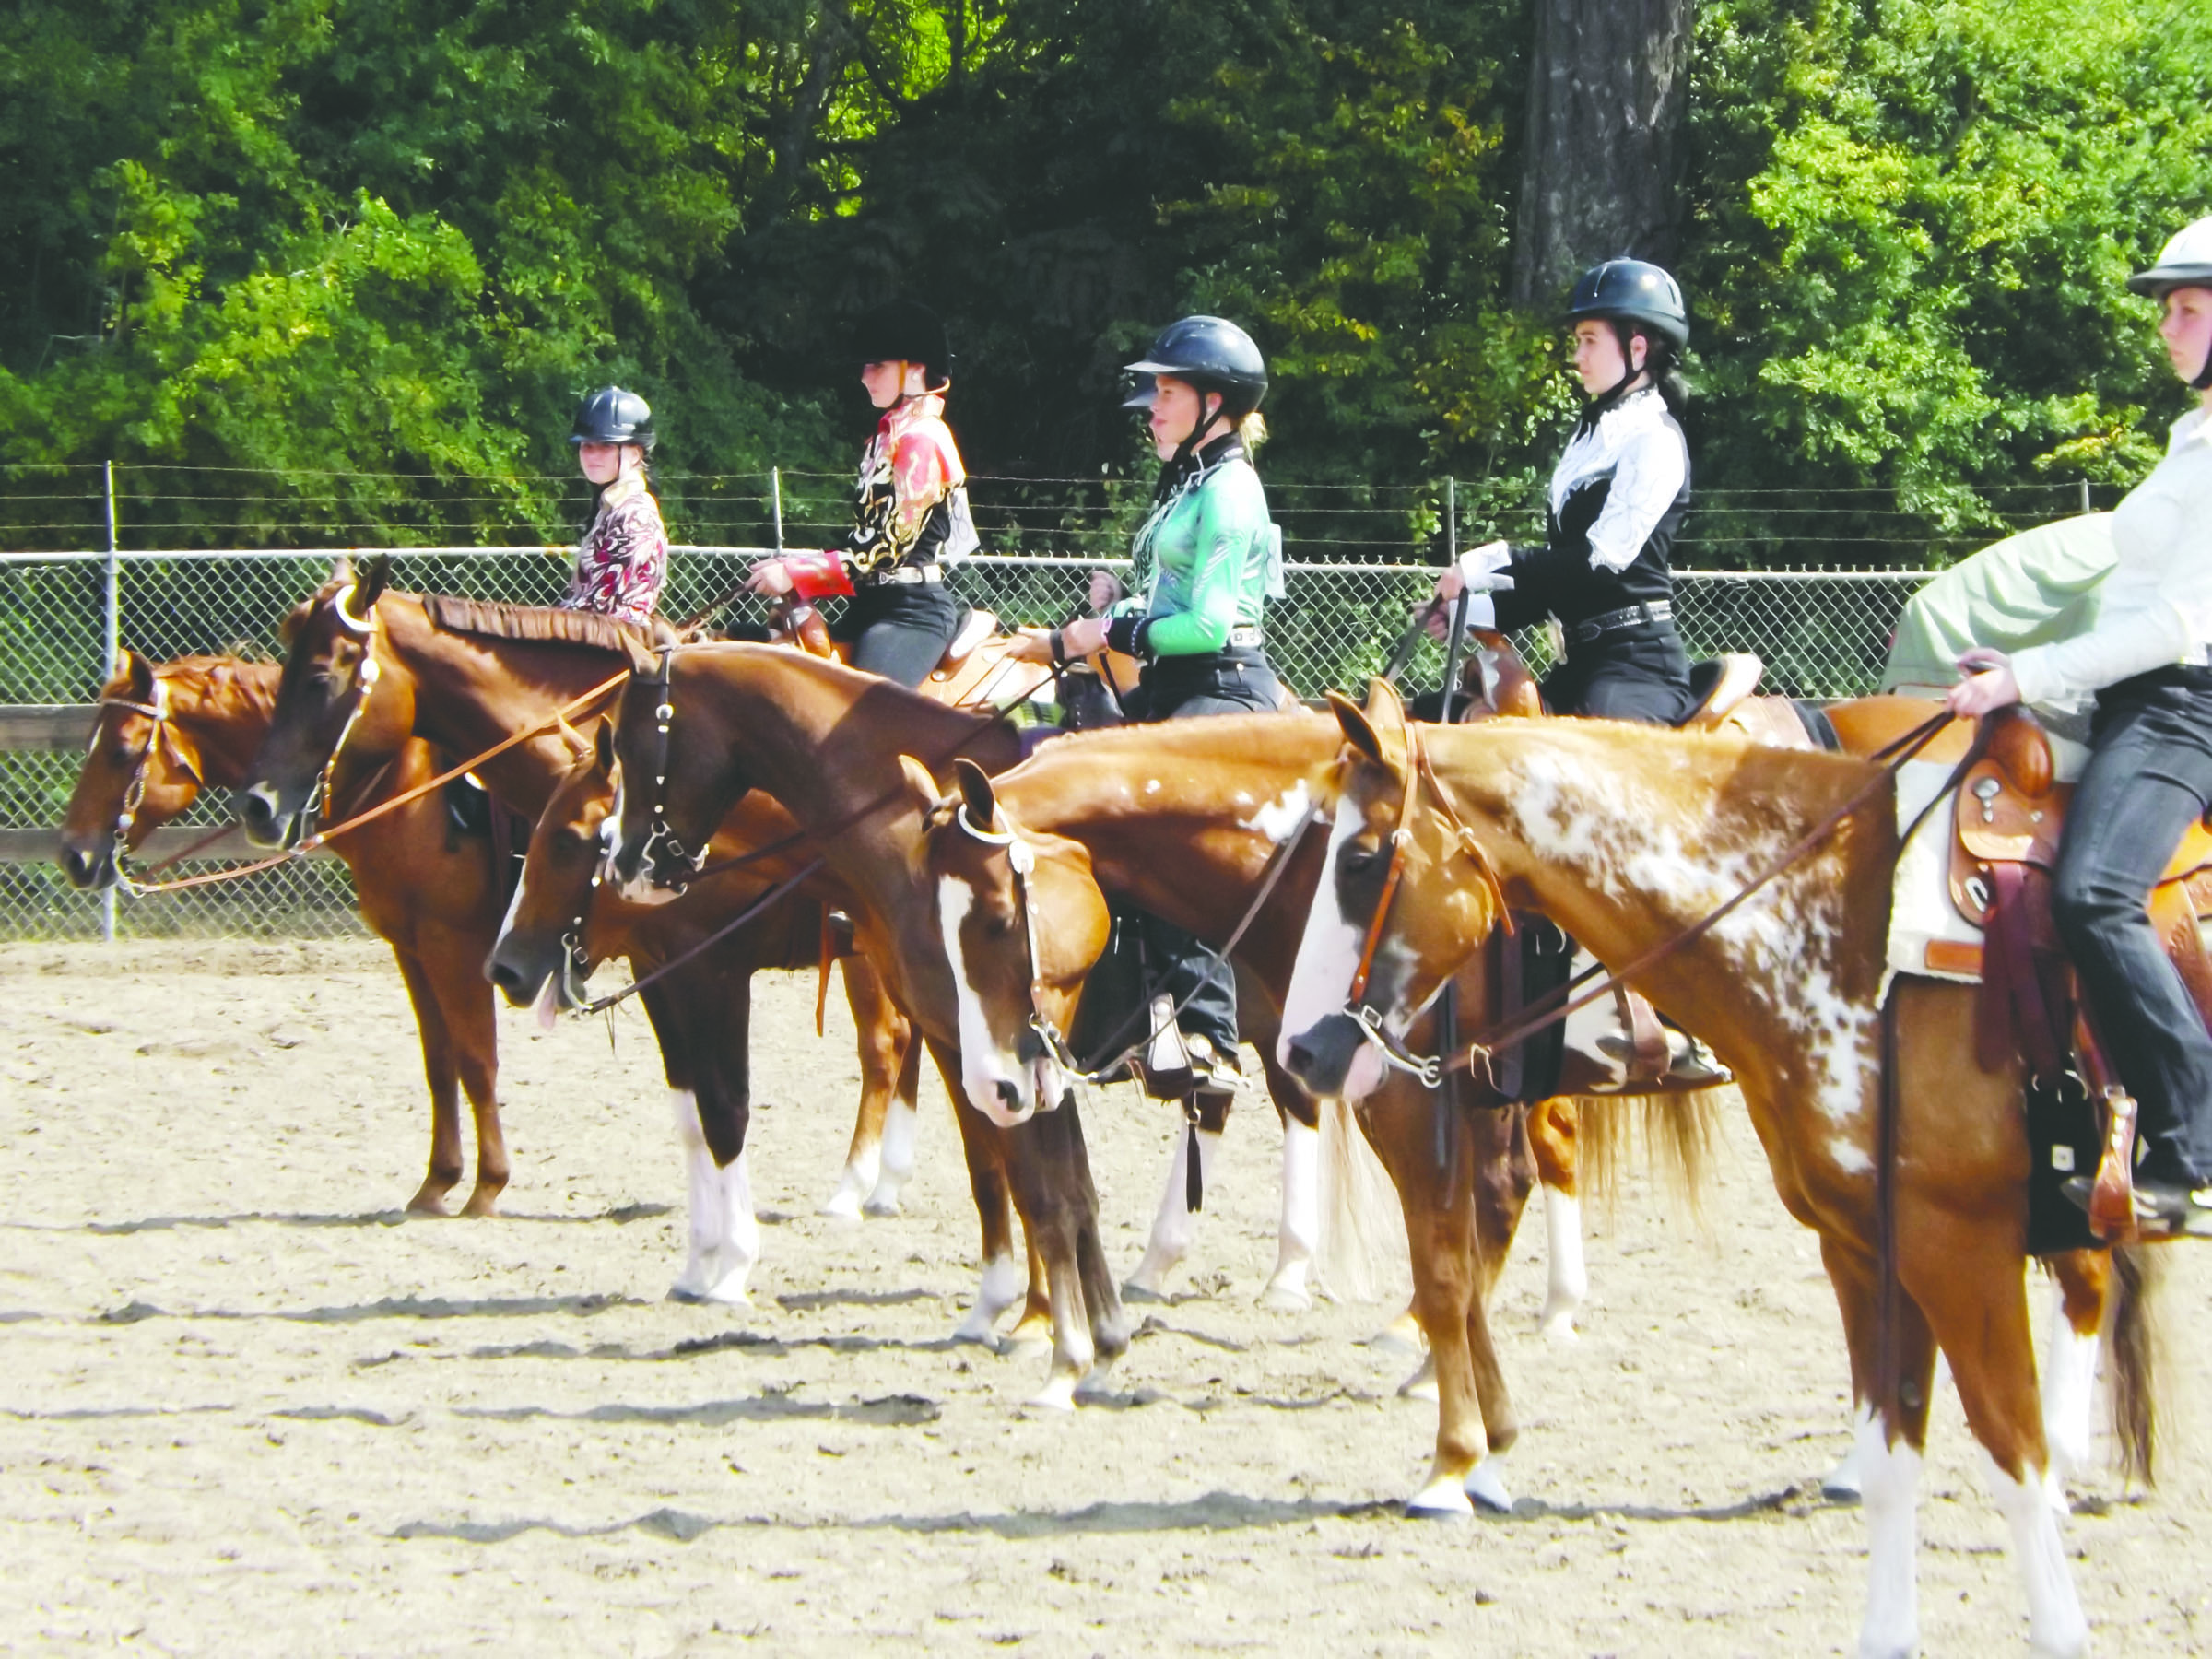 Clallam Fair 4-H stockseat equitation seniors hoping to win positions at the State Fair in Puyallup were